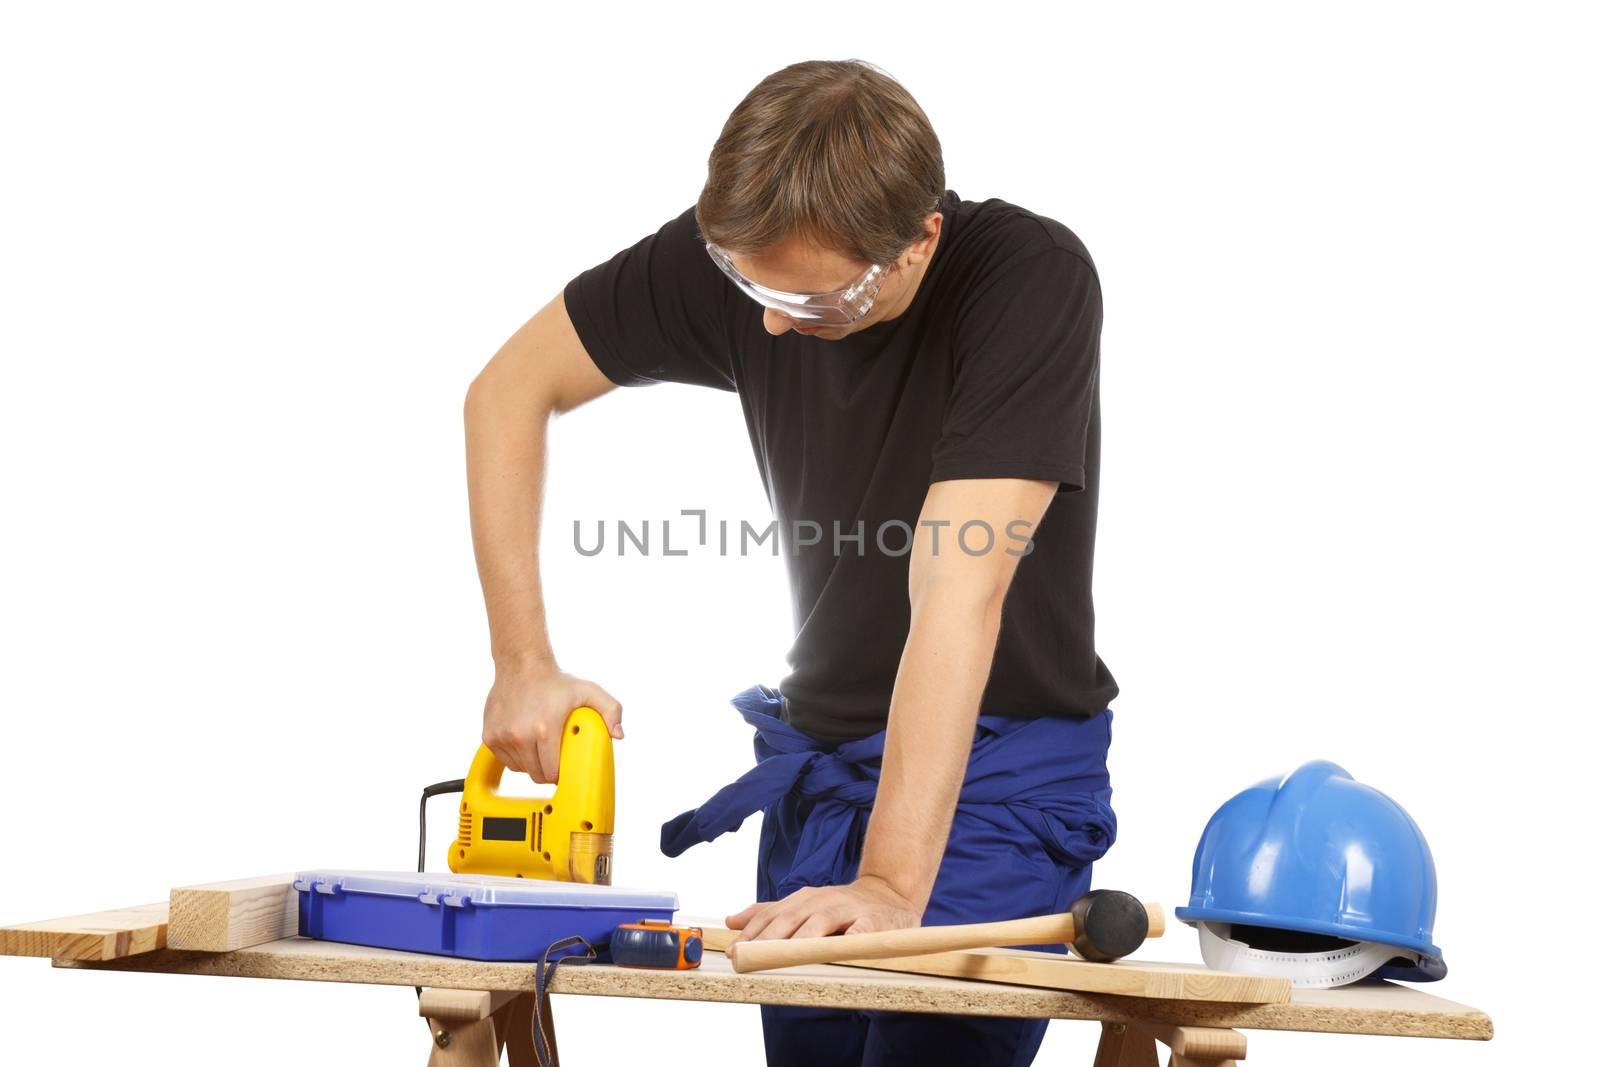 Man working with tools and wood. Over white.